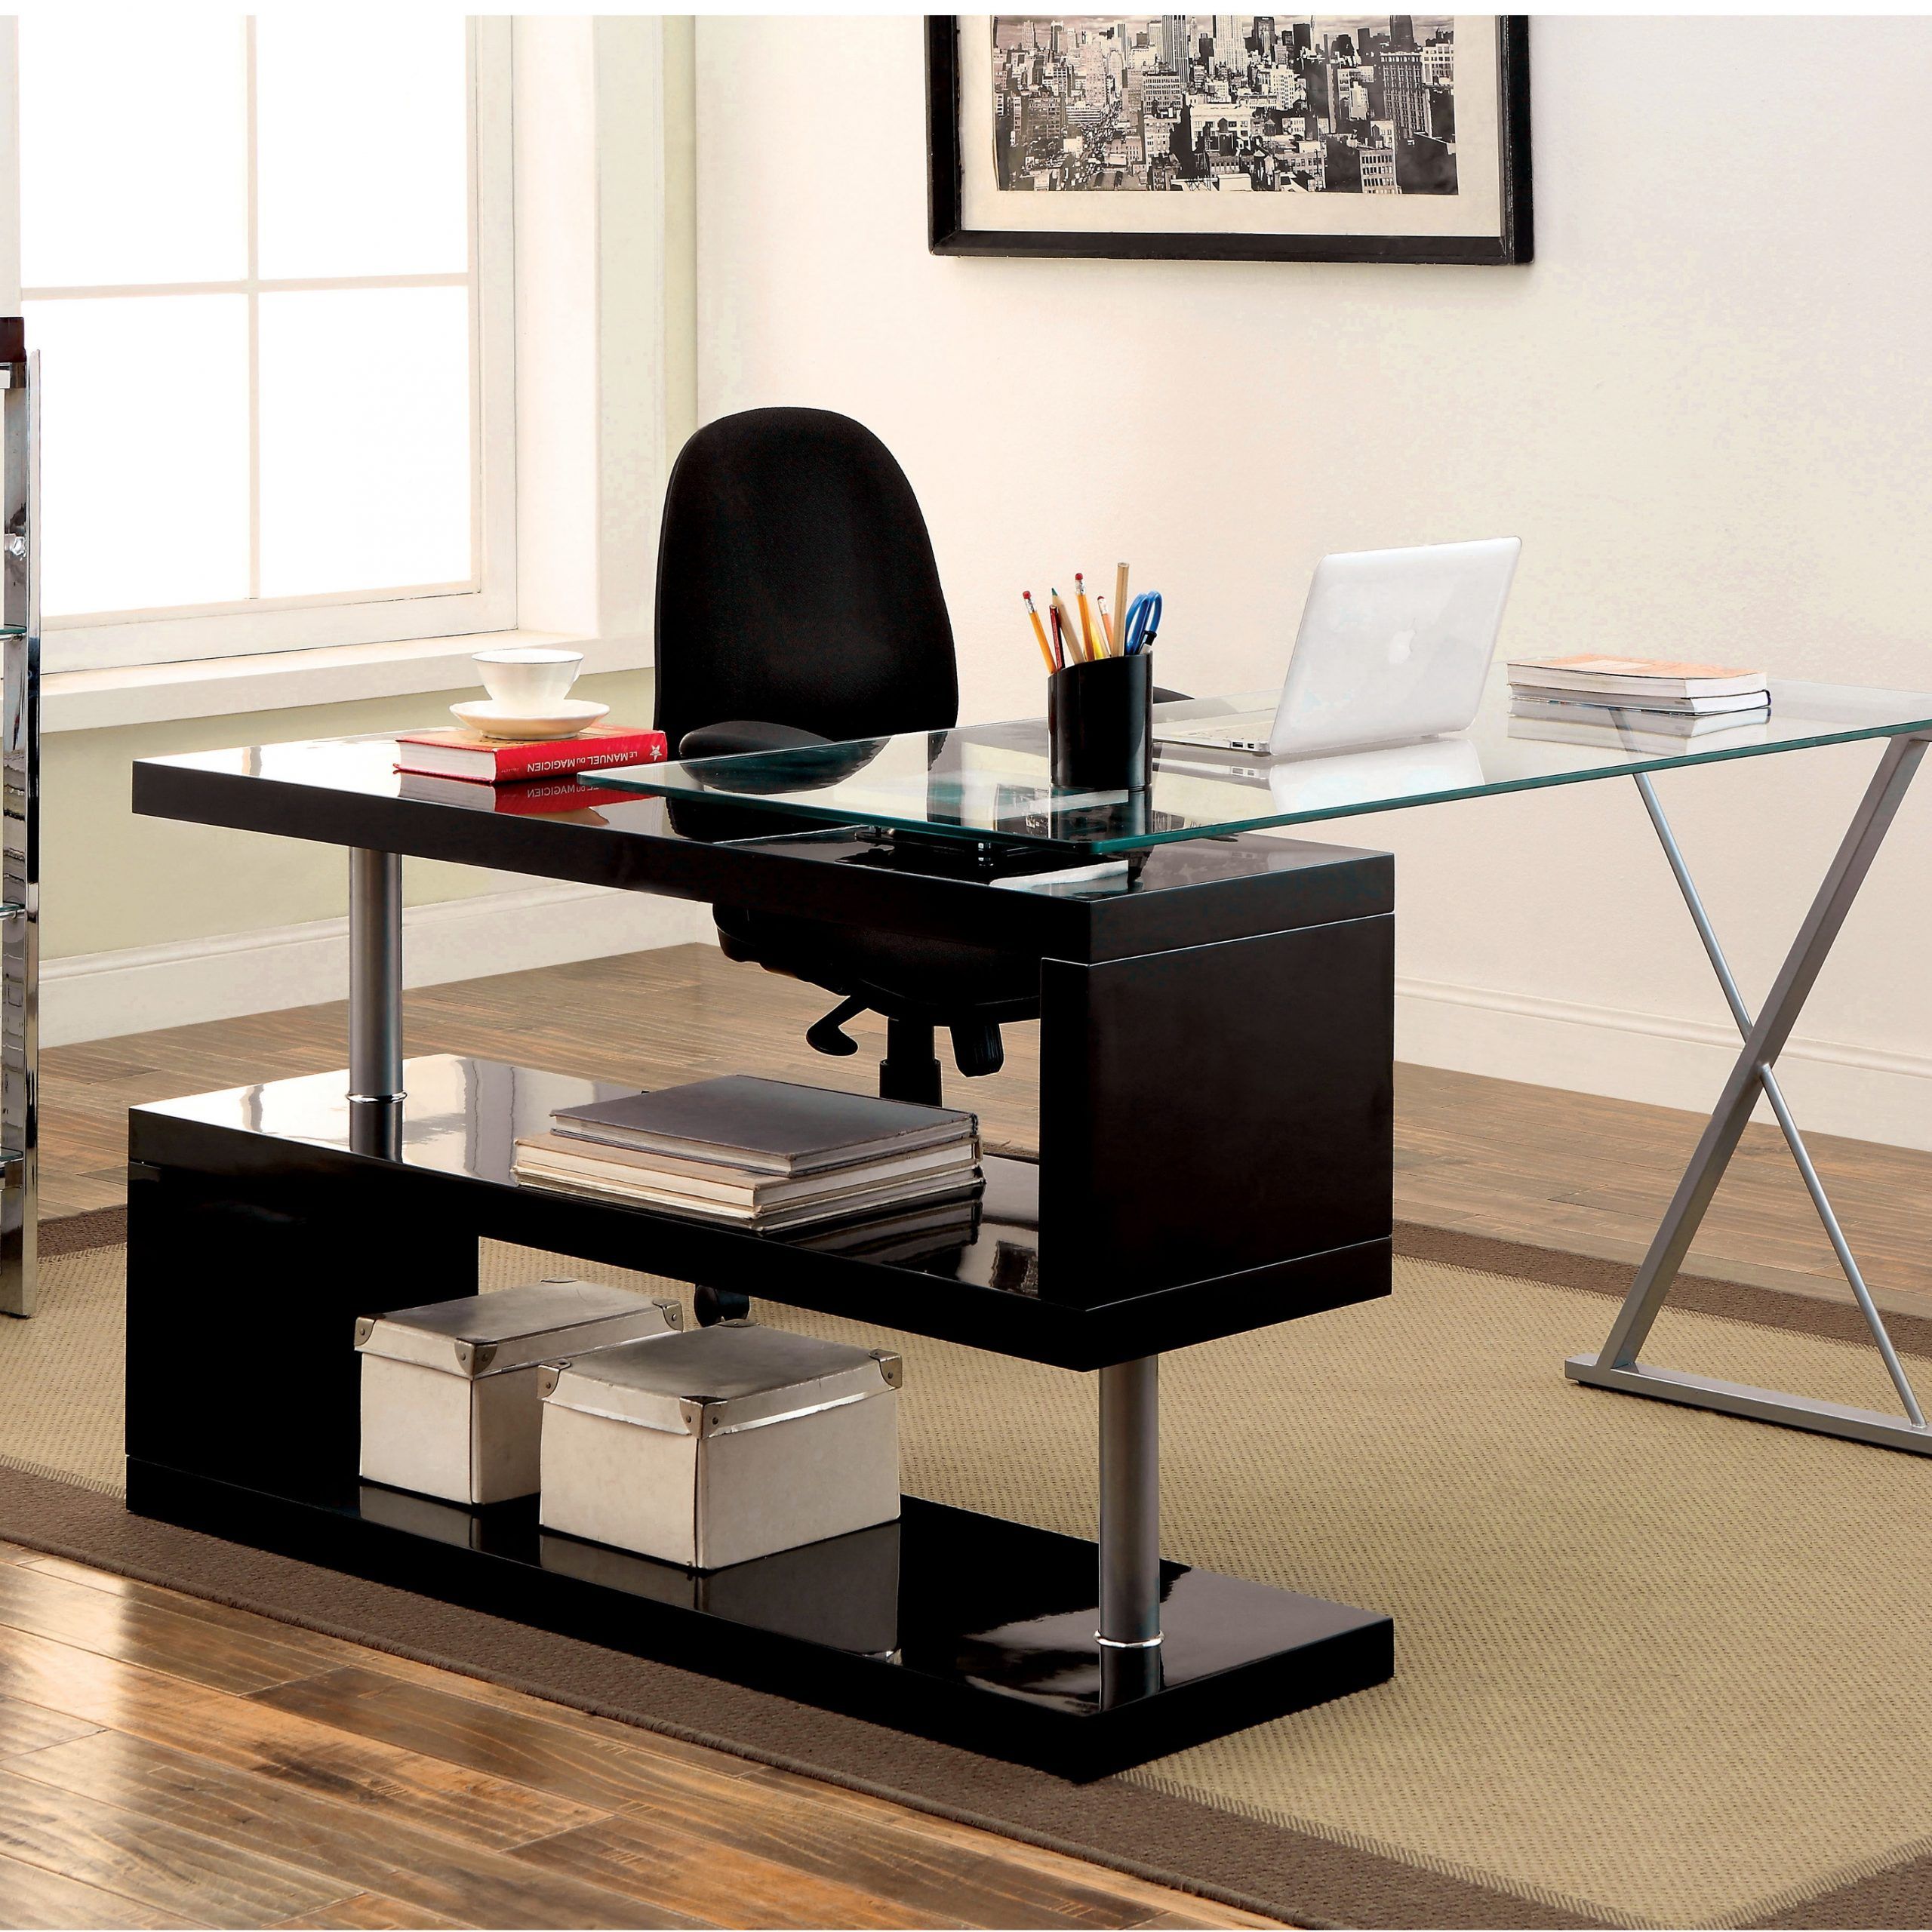 20+ Contemporary Office Desk Designs, Decorating Ideas | Design Trends Throughout Black Glass And Walnut Wood Office Desks (View 8 of 15)